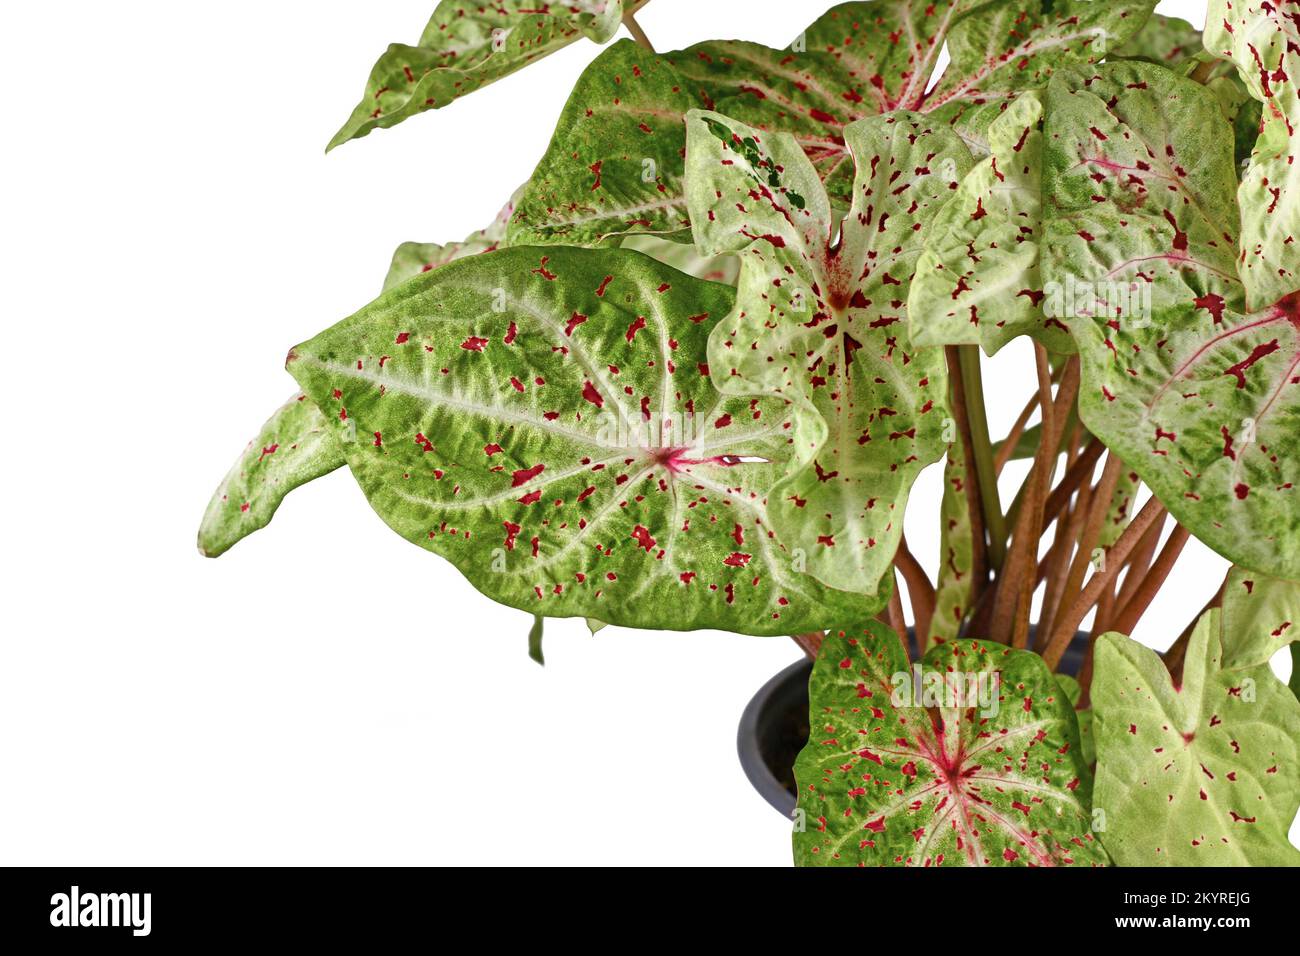 Leaf of 'Caladium Miss Muffet' houseplant with pink and green leaves with red dots Stock Photo